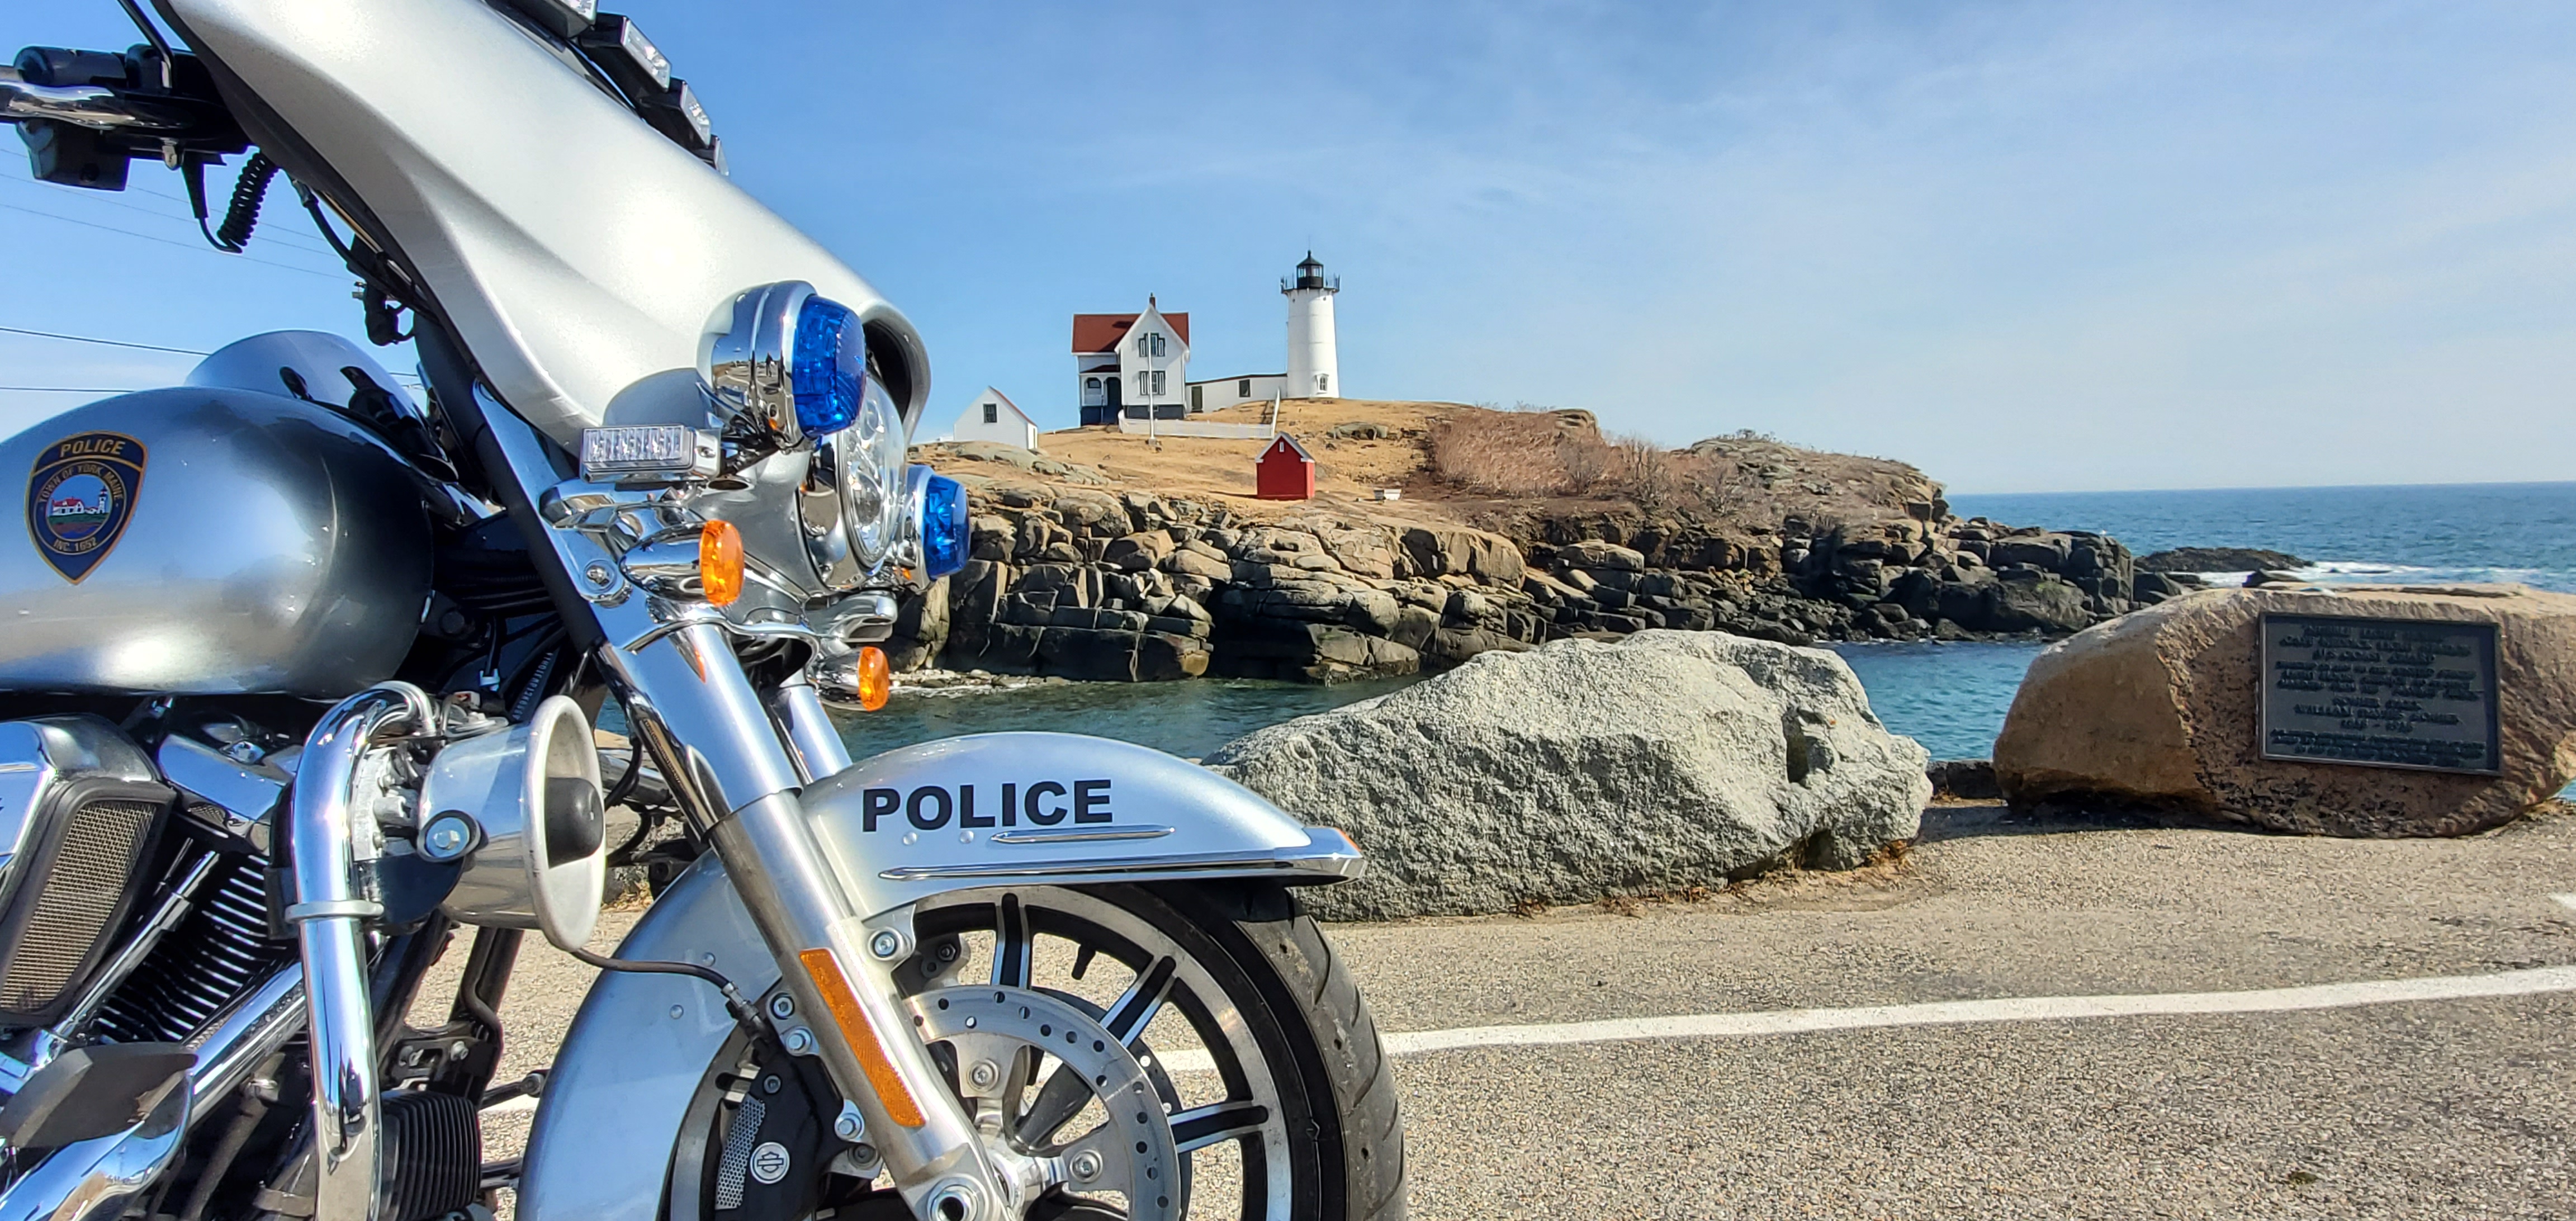 York Police Department, ME Public Safety Jobs